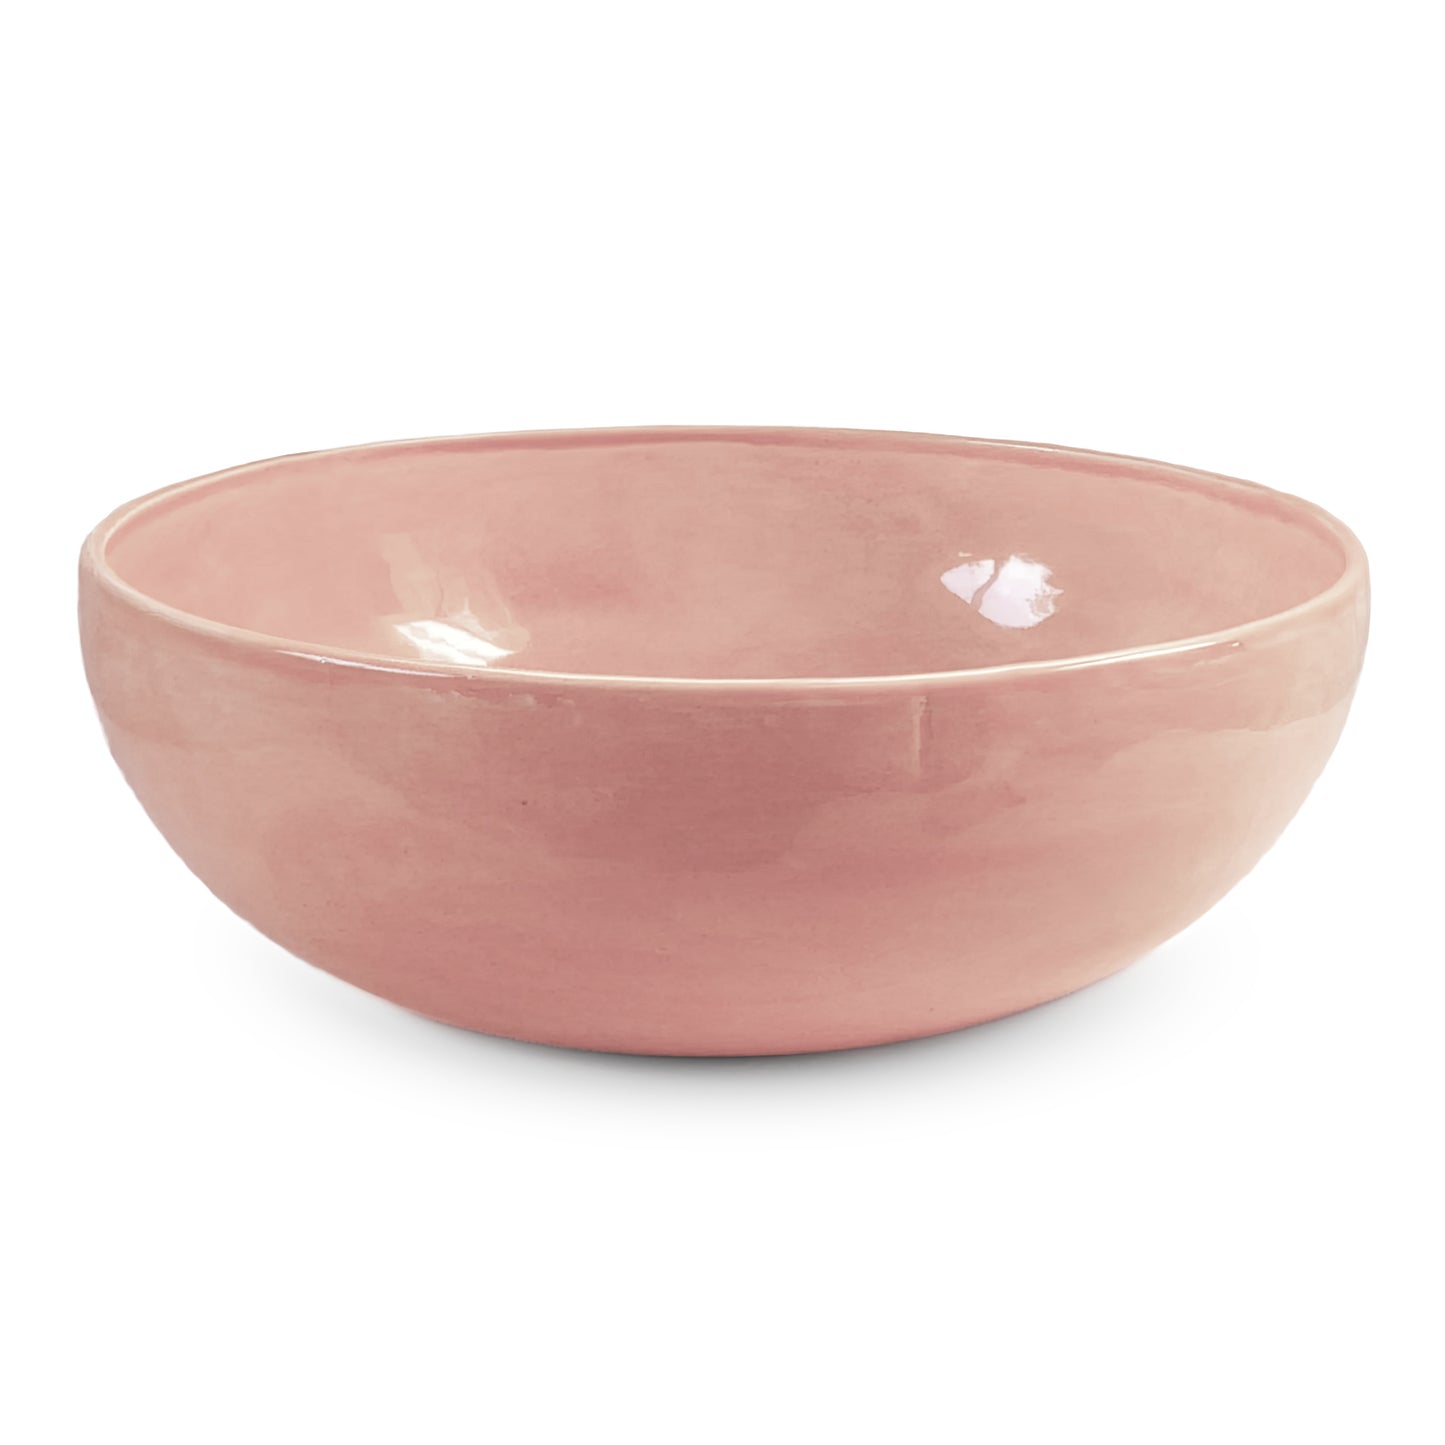 WELCOME BOWL CD PINK